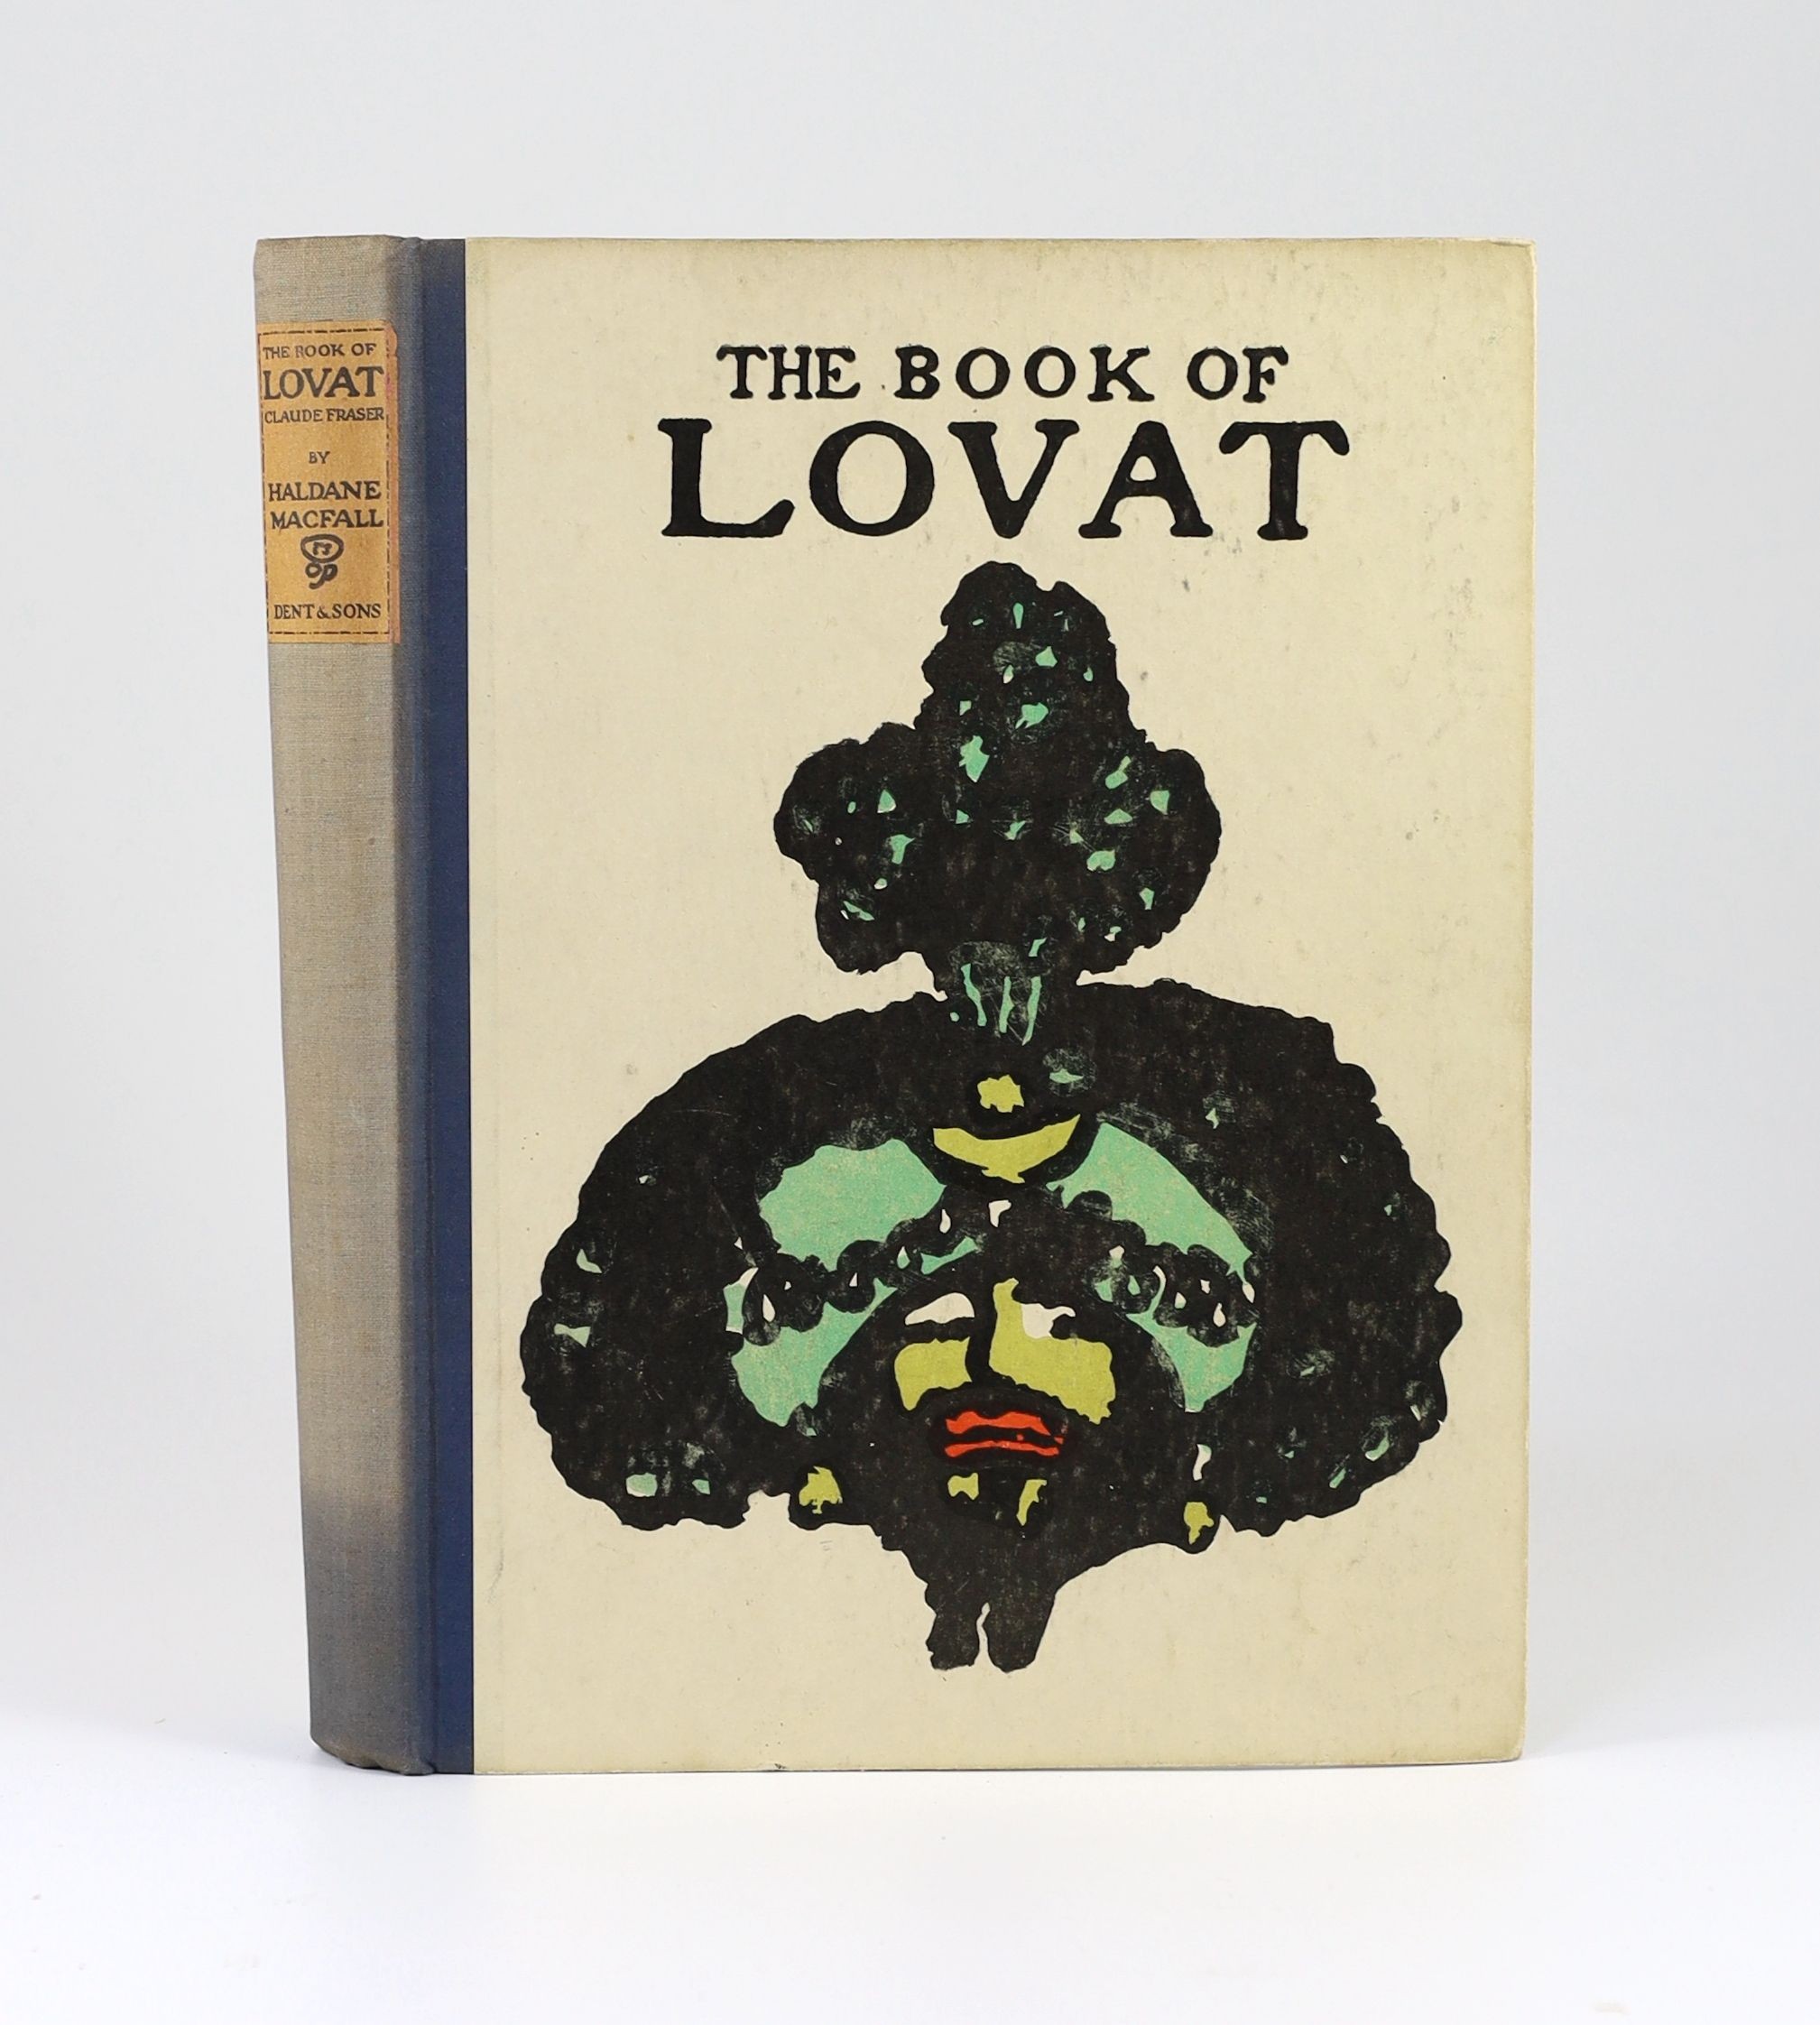 MacFall, Haldane - The Book of Lovat Claud Fraser, 4to, original cloth and pictorial boards, 20 plates, J.M.Dent & Sons, London, 1923